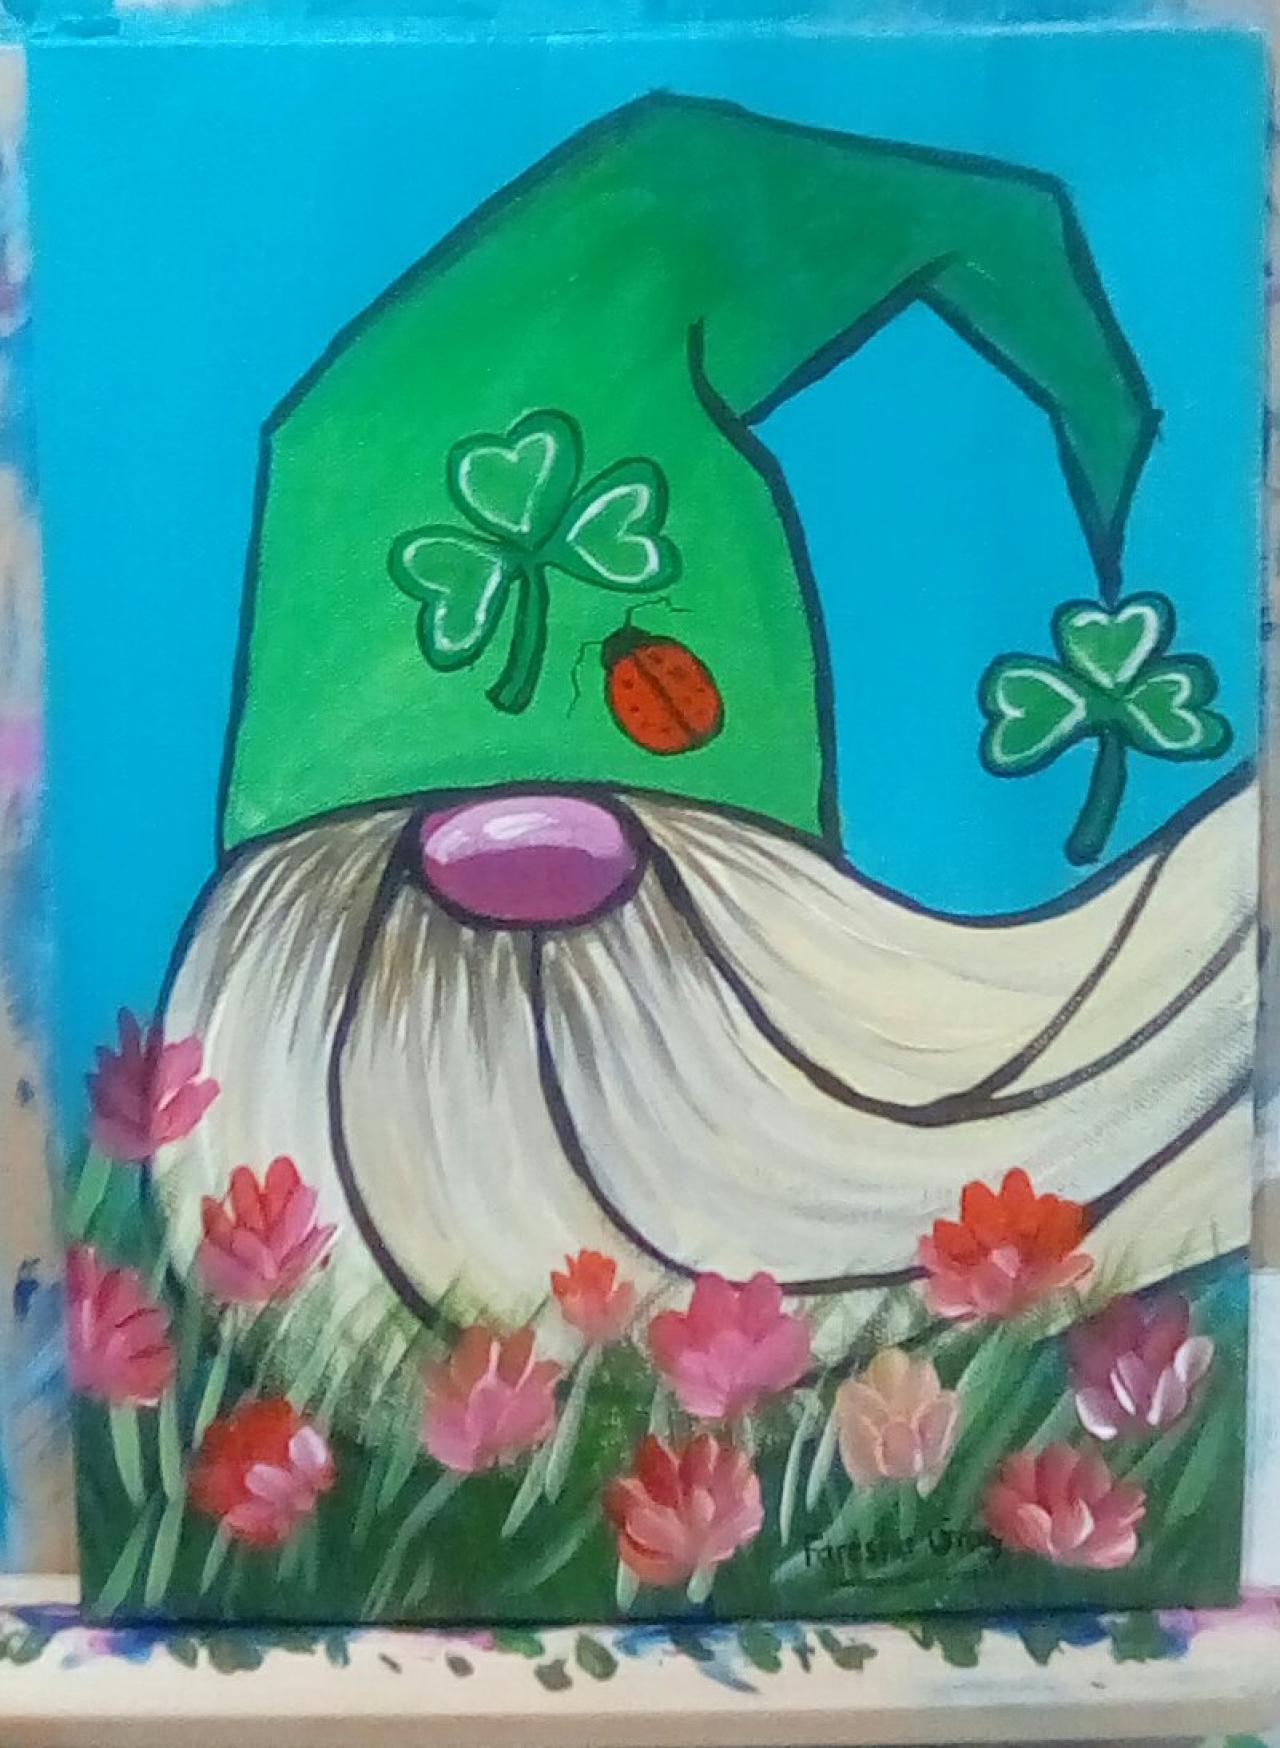 RESCHEDULED*** DATE TO BE ANNOUNCED ACRYLIC PAINTING ON CANVAS - GOOD  NIGHT GNOME